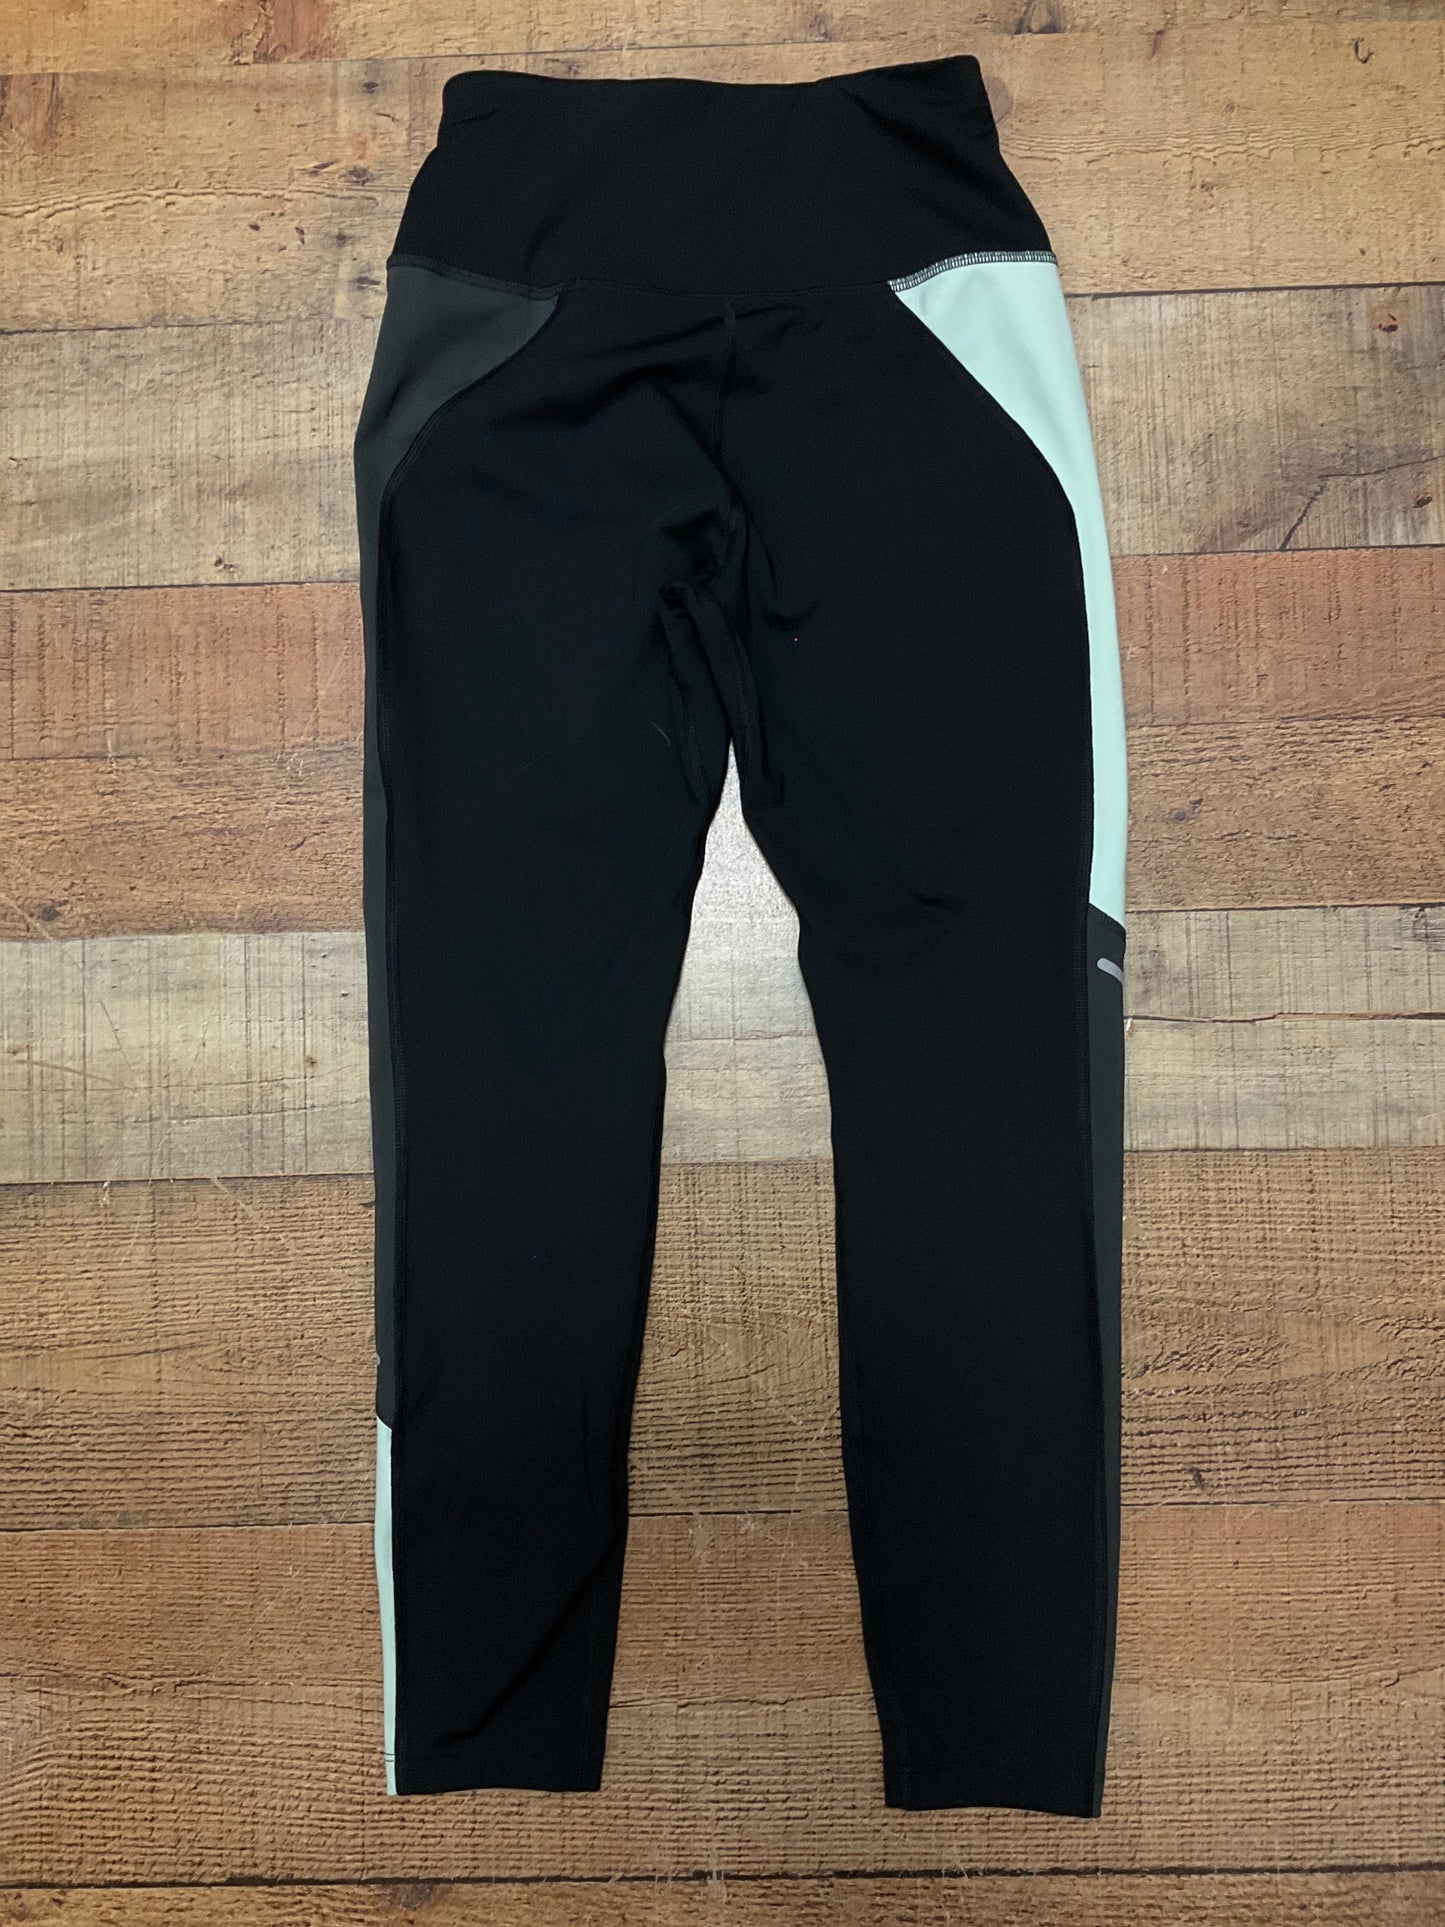 Athletic Leggings By Asics  Size: Xs